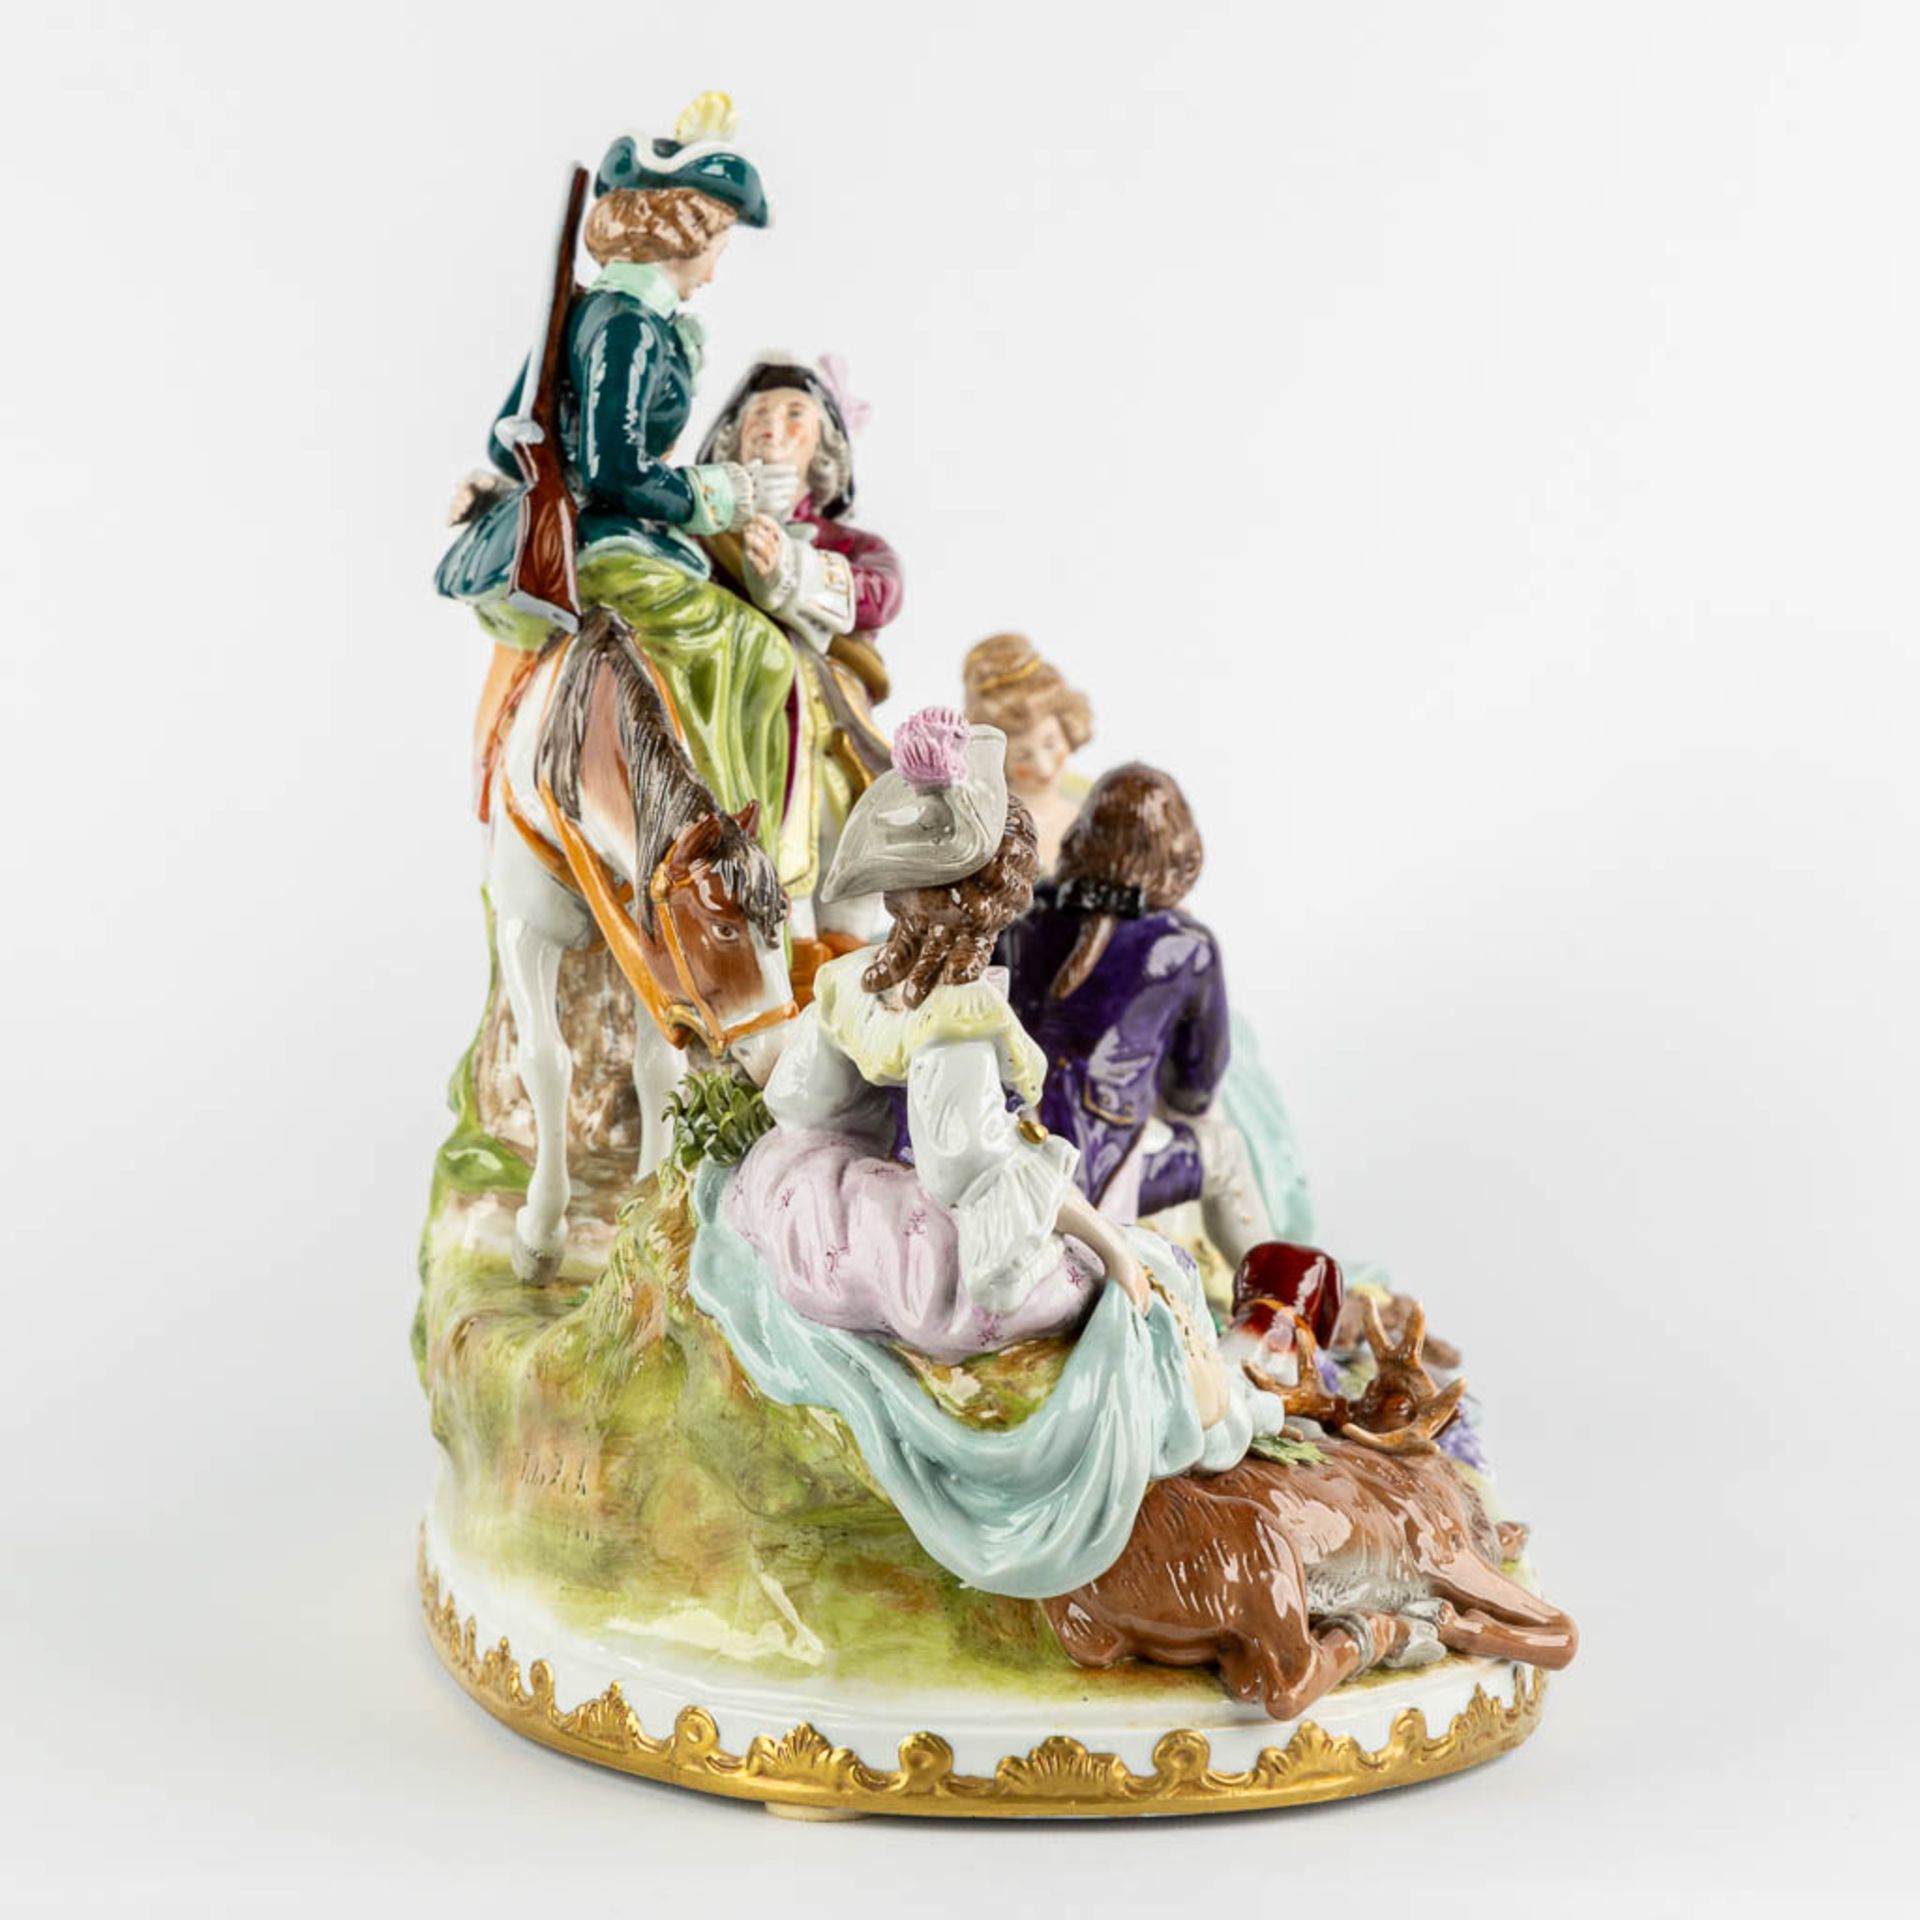 Scheibe-Alsbach, a polychrome porcelain group 'Picnic with multiple figurines'. Saxony, Germany. 20t - Image 4 of 19